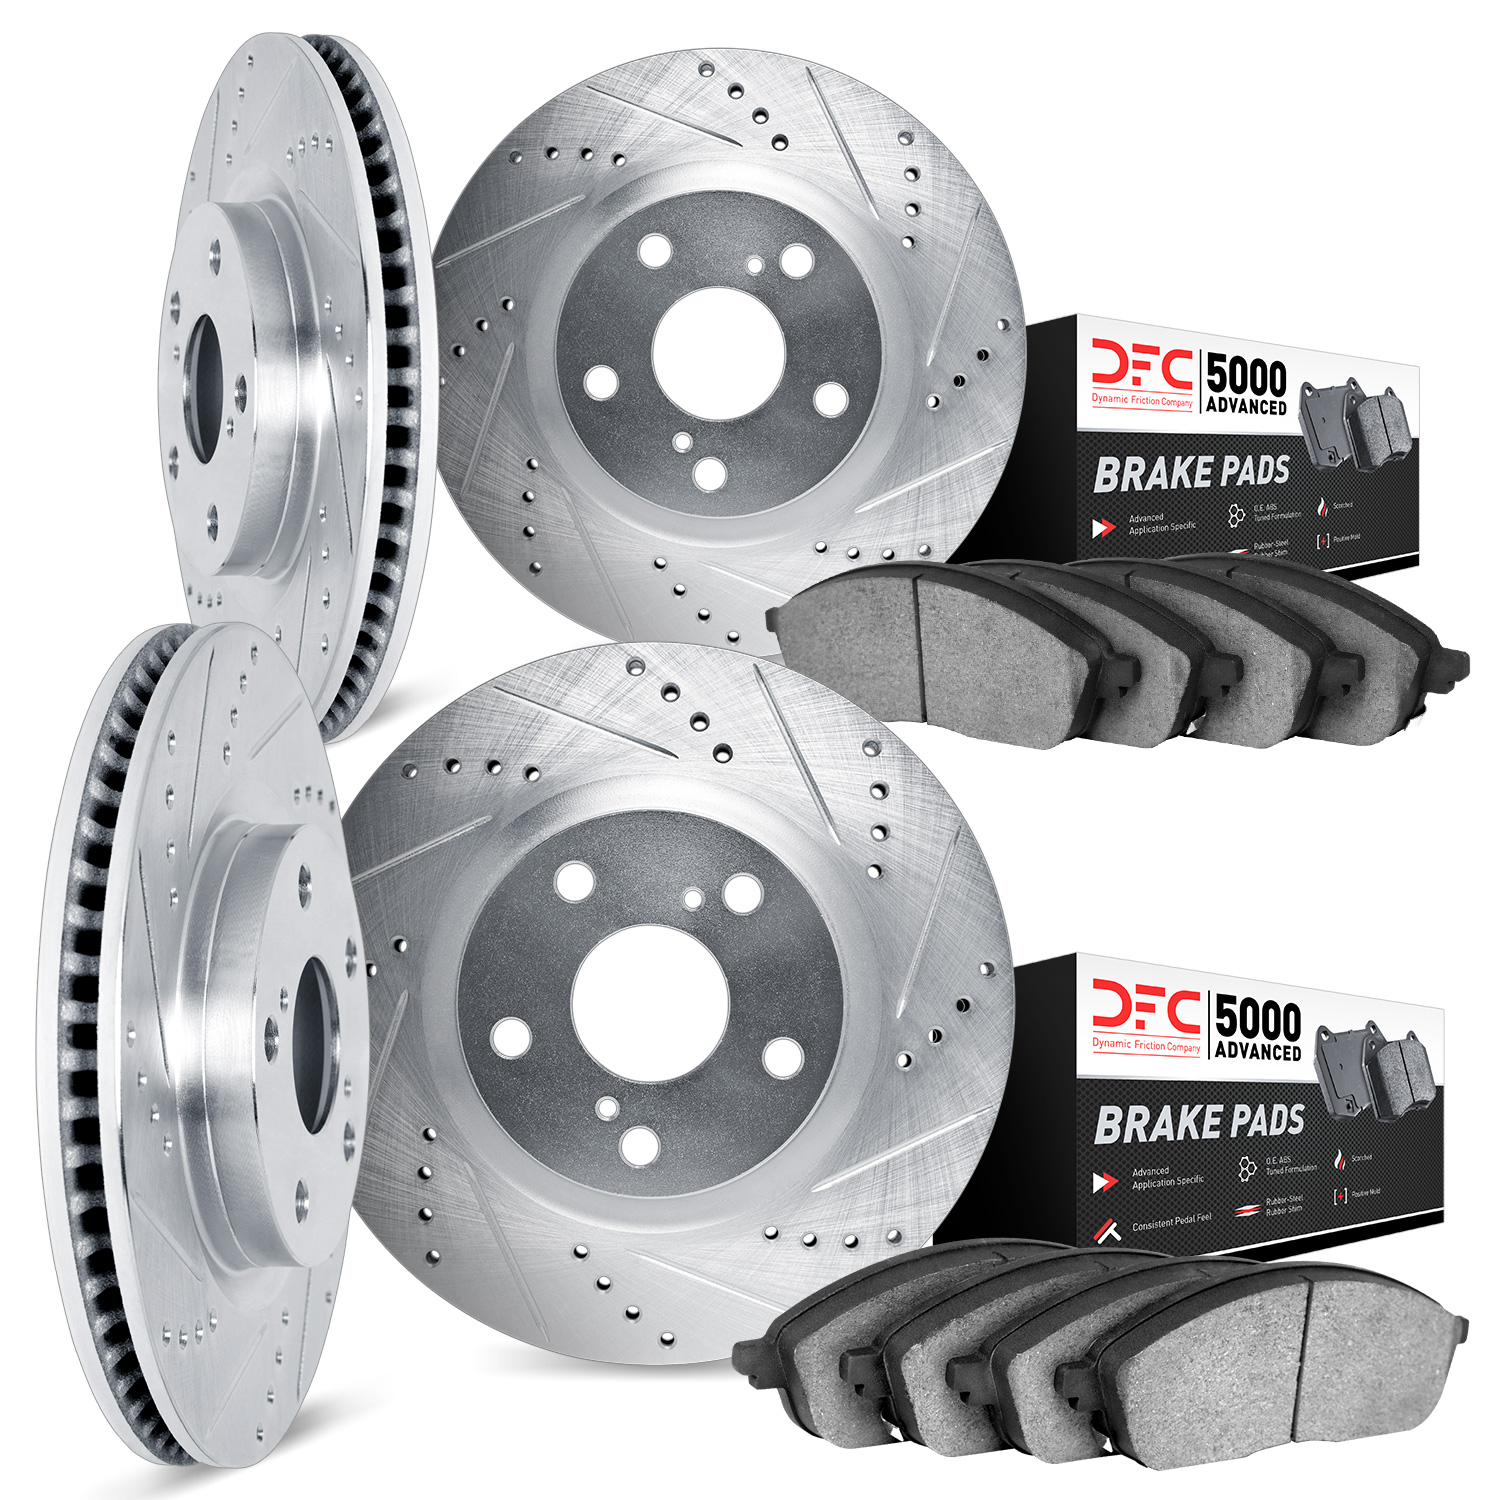 7504-40240 Drilled/Slotted Brake Rotors w/5000 Advanced Brake Pads Kit [Silver], 2003-2003 Mopar, Position: Front and Rear